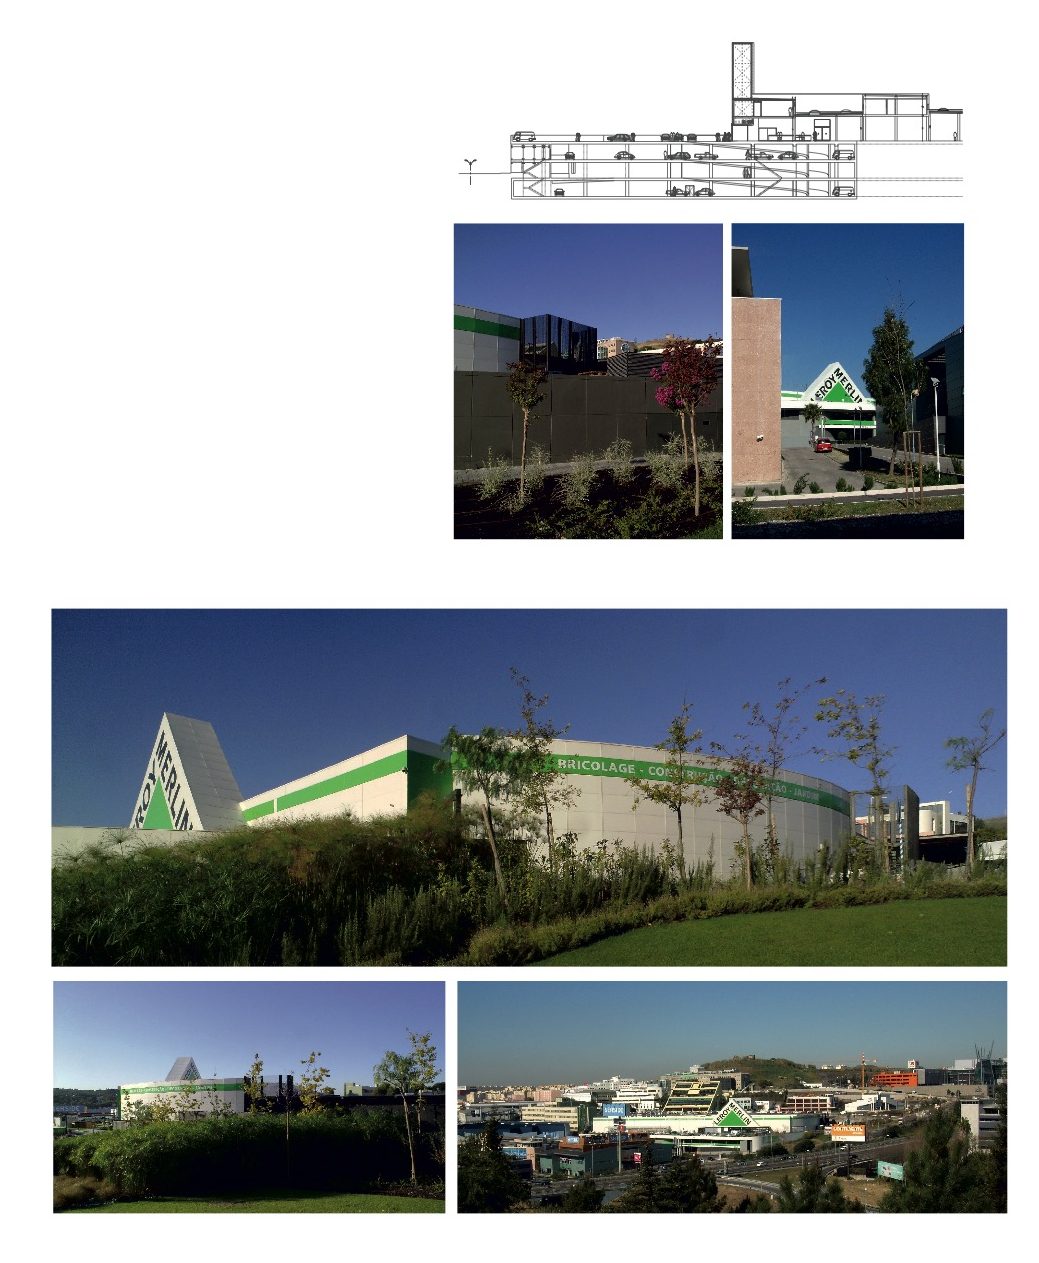 Conversion from AKI to Leroy Merlin Store and expansion, Alfragide – Brimogal Sociedade Imobiliária S.A. – 32500 sq m of gross building area and 825 parking spaces on a plot of 18166 sq m.